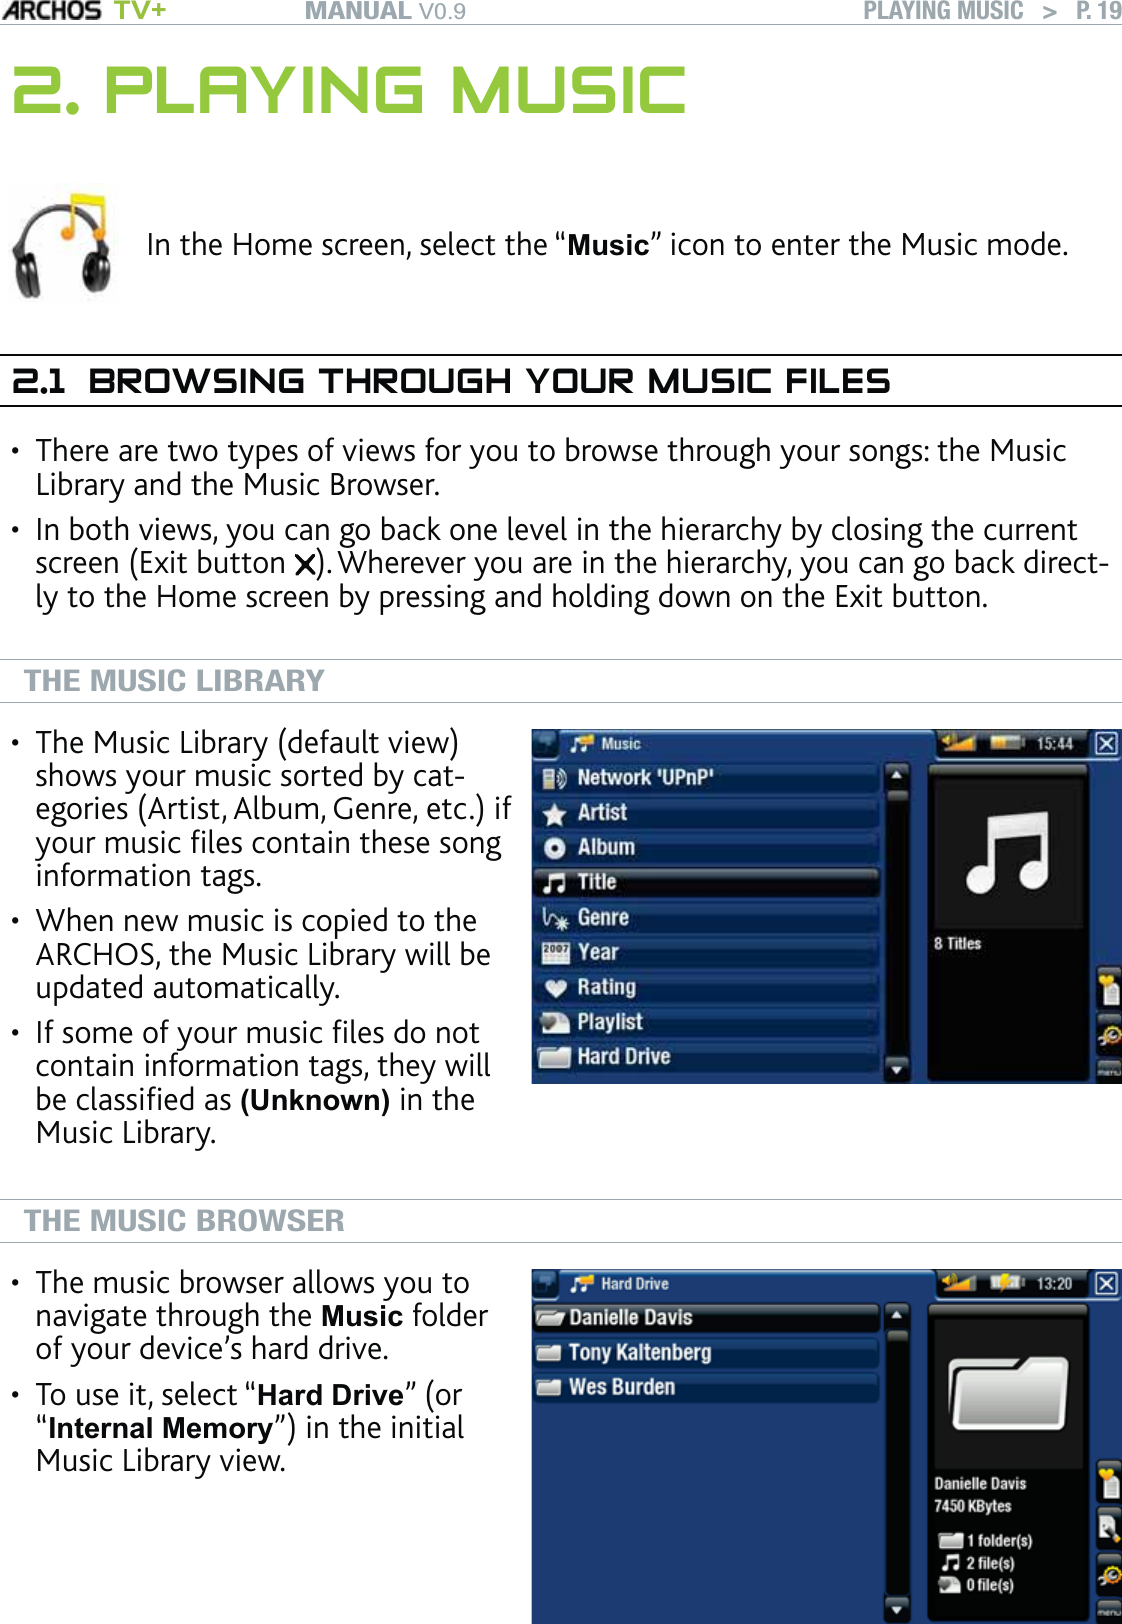 MANUAL V0.9 TV+ PLAYING MUSIC   &gt;   P. 192. PLAYING MUSICIn the Home screen, select the “Music” icon to enter the Music mode.2.1  BROWSING THROUGH YOUR MUSIC FILESThere are two types of views for you to browse through your songs: the Music Library and the Music Browser.In both views, you can go back one level in the hierarchy by closing the current screen (Exit button  ). Wherever you are in the hierarchy, you can go back direct-ly to the Home screen by pressing and holding down on the Exit button.  THE MUSIC LIBRARYThe Music Library (default view) shows your music sorted by cat-egories (Artist, Album, Genre, etc.) if your music ﬁles contain these song information tags.When new music is copied to the ARCHOS, the Music Library will be updated automatically.If some of your music ﬁles do not contain information tags, they will be classiﬁed as (Unknown) in the Music Library.•••THE MUSIC BROWSERThe music browser allows you to navigate through the Music folder of your device’s hard drive. To use it, select “Hard Drive” (or “Internal Memory”) in the initial Music Library view.••••